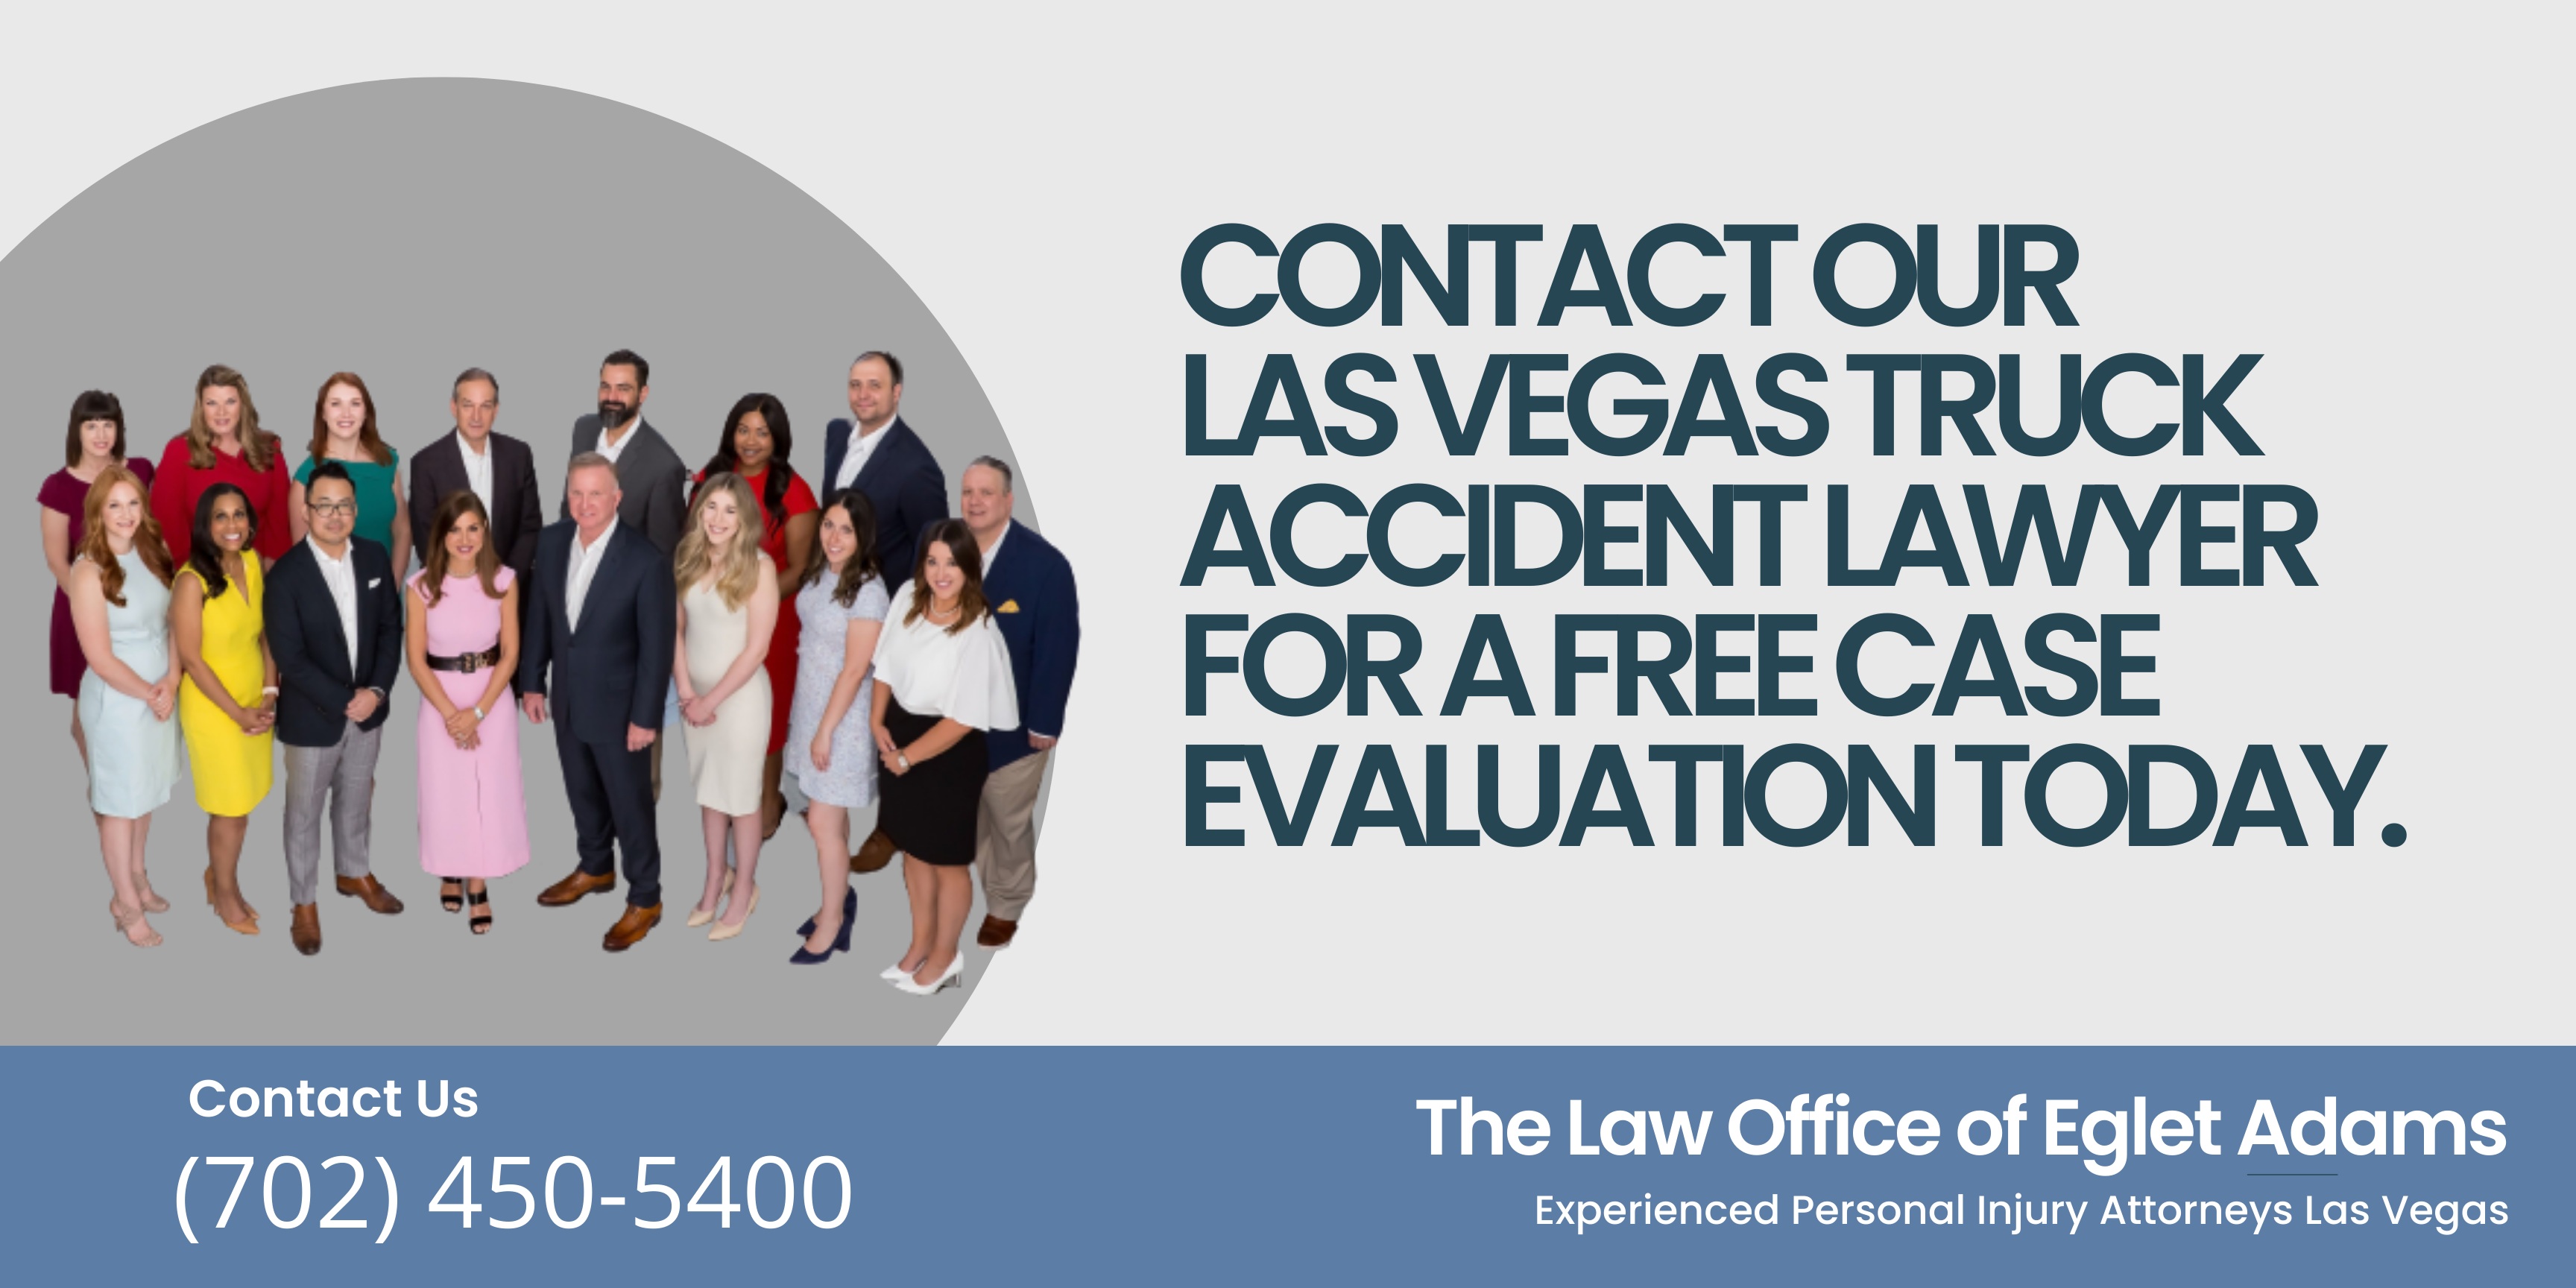 Contact our Las Vegas Truck Accident Lawyer